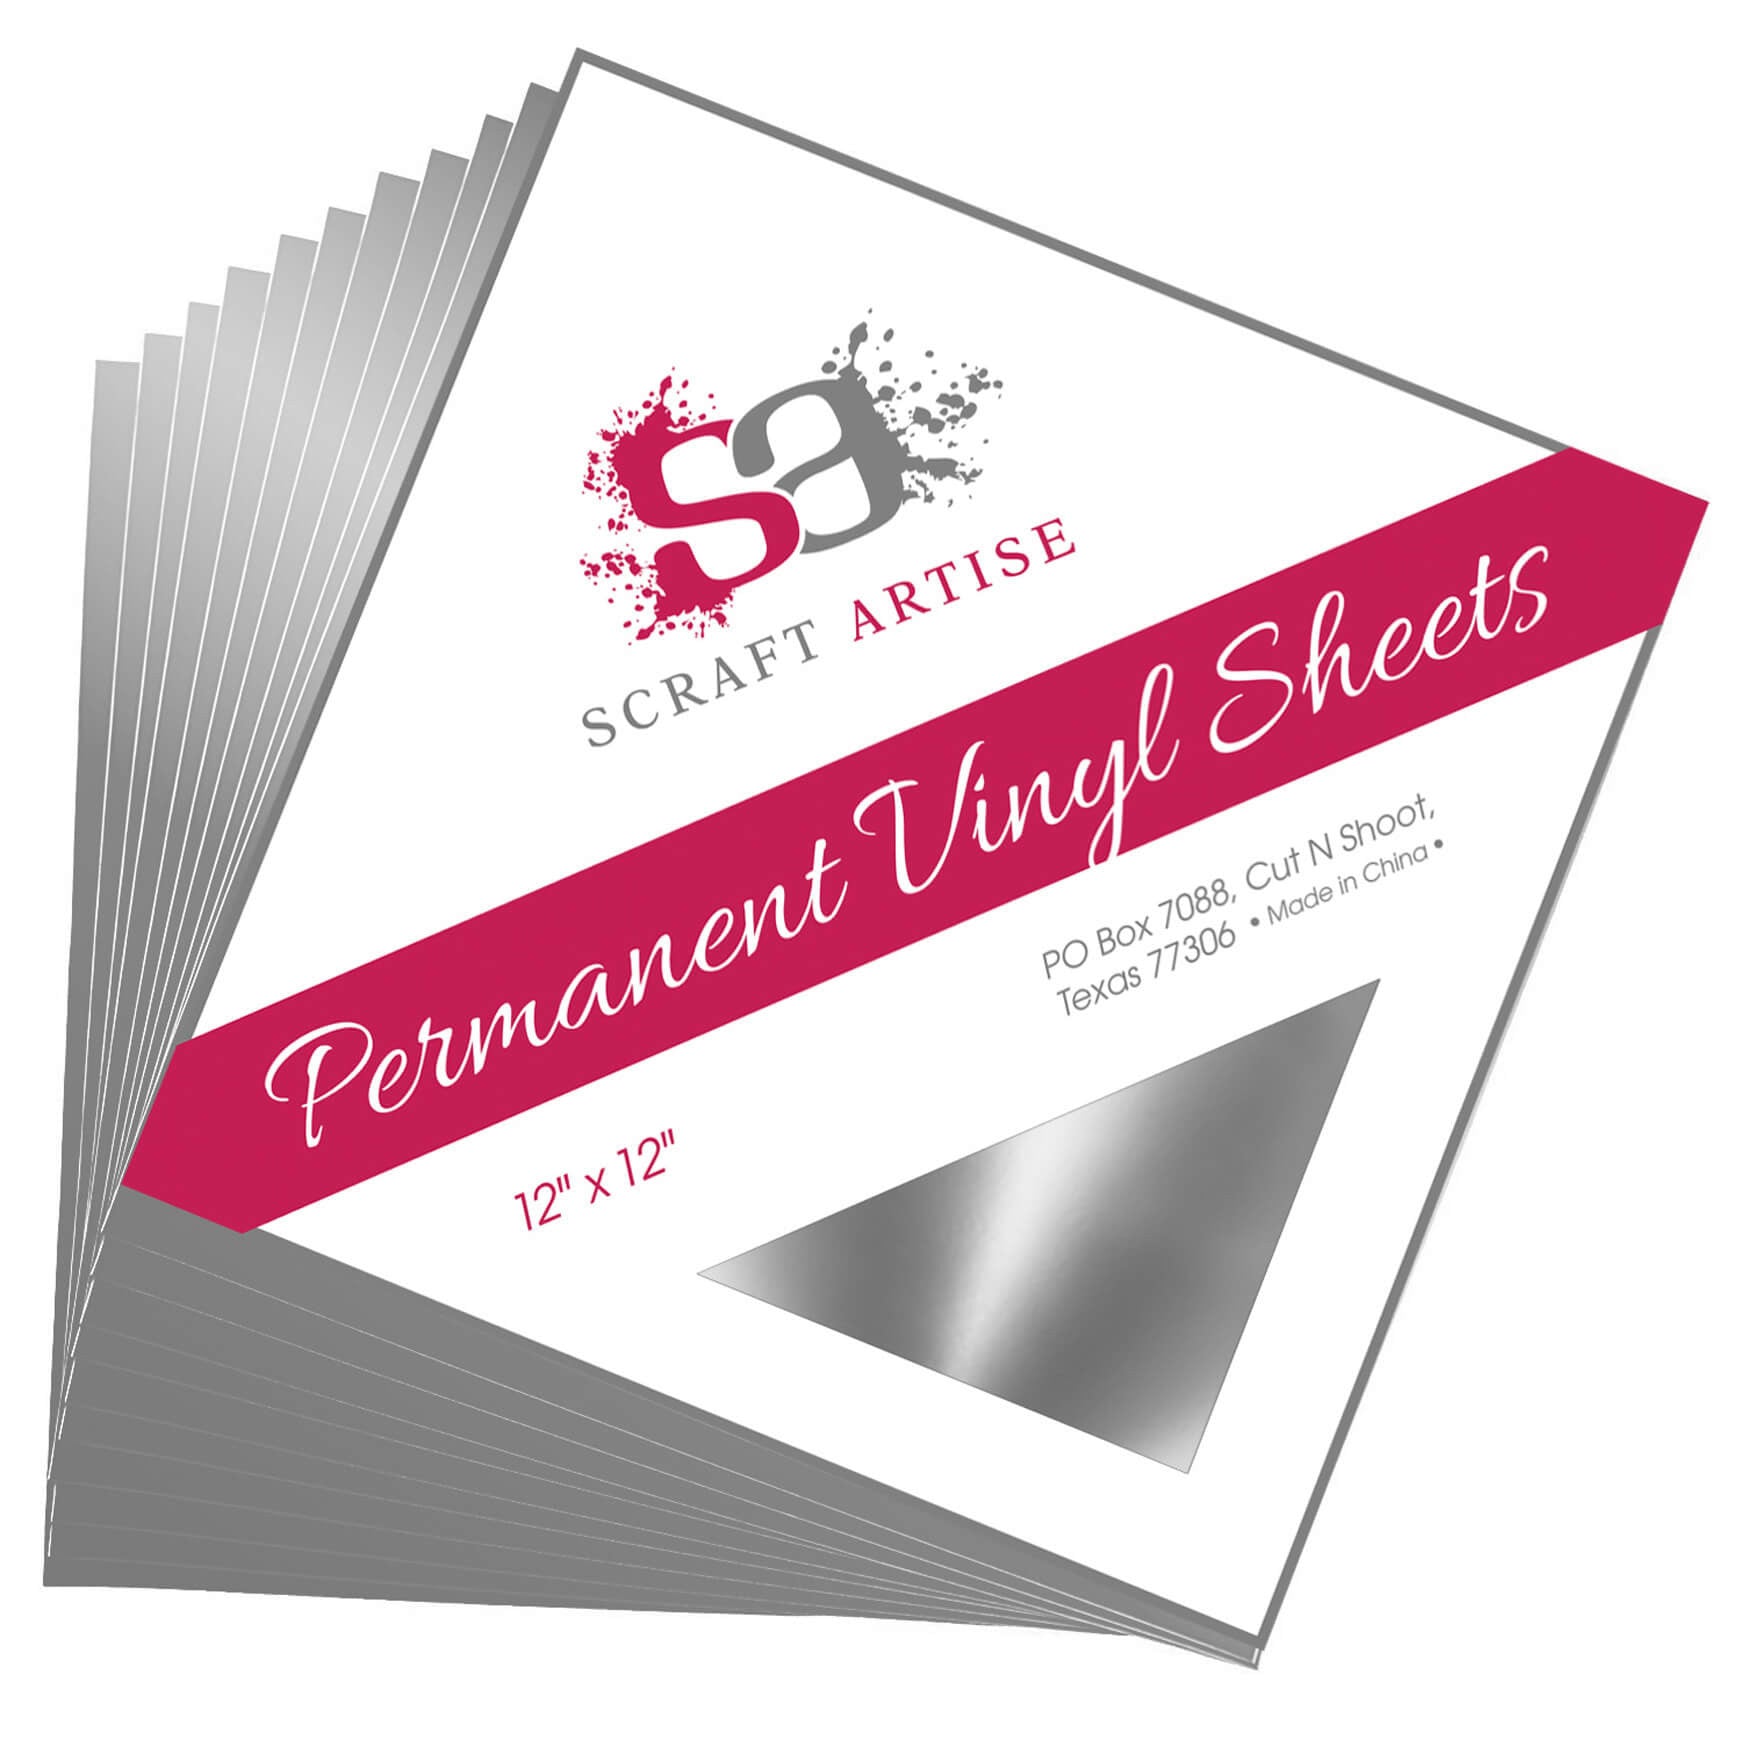 Permanent Adhesive Vinyl Sheets Silver Metallic Gloss by Scraft Artise